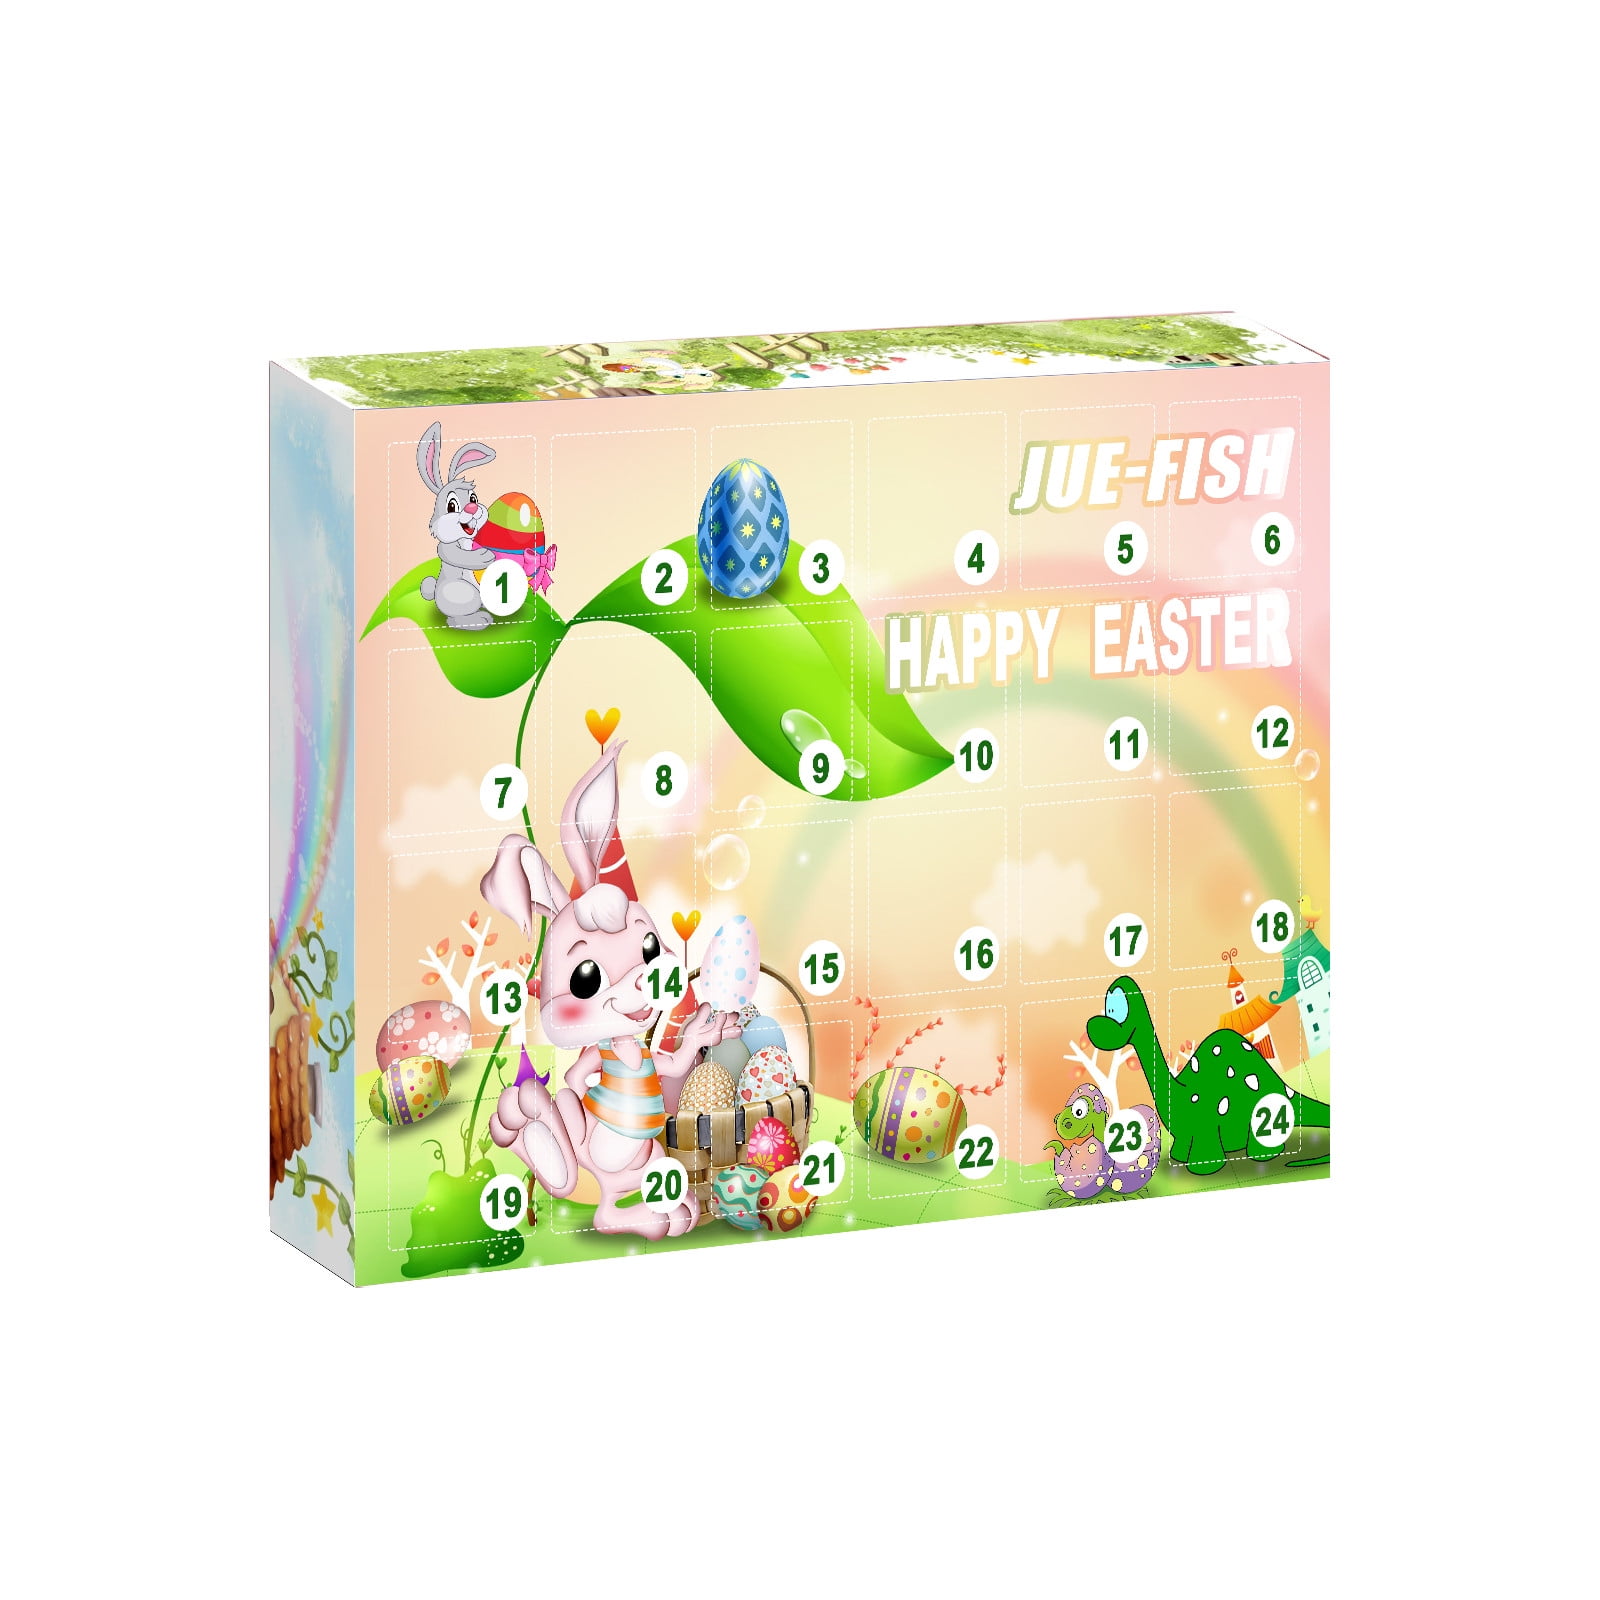 Details about   Children's Carton Toy Paper Dinosaur Animal Carton Learning Educational Game 